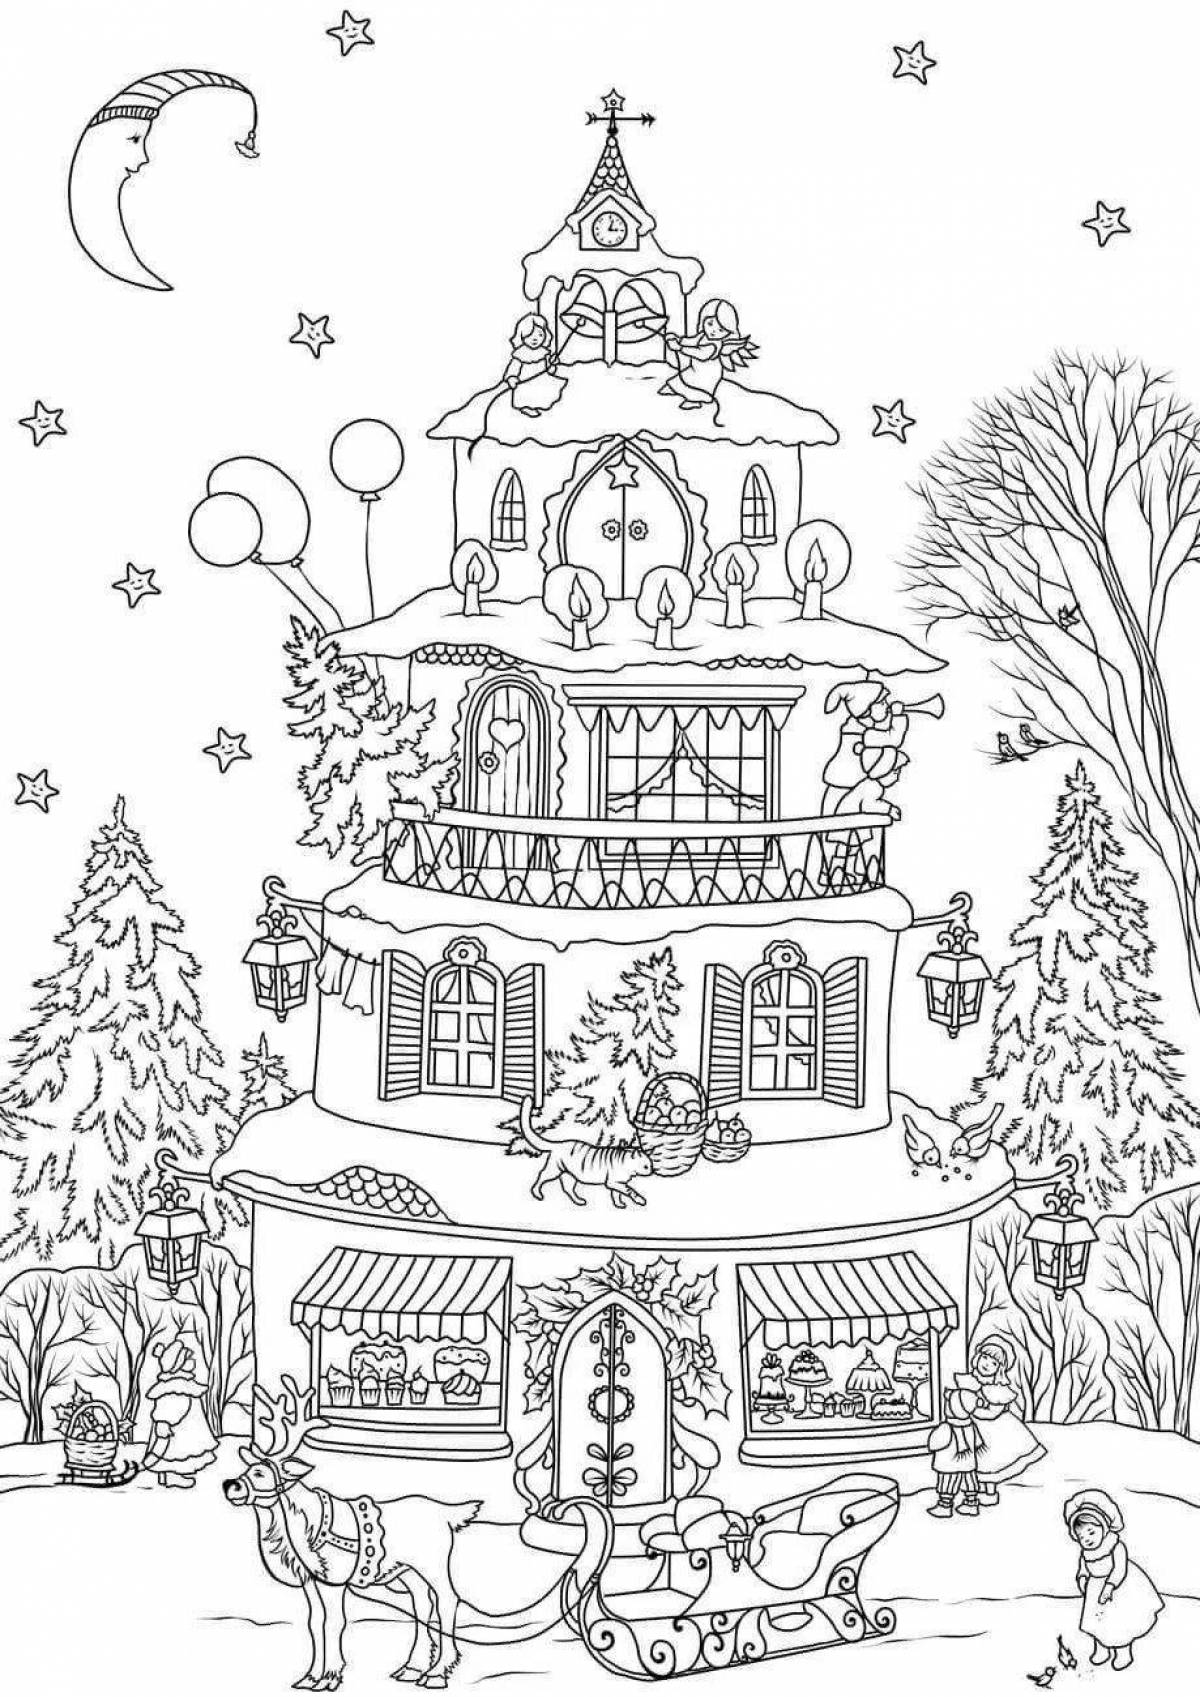 Awesome Christmas house coloring book